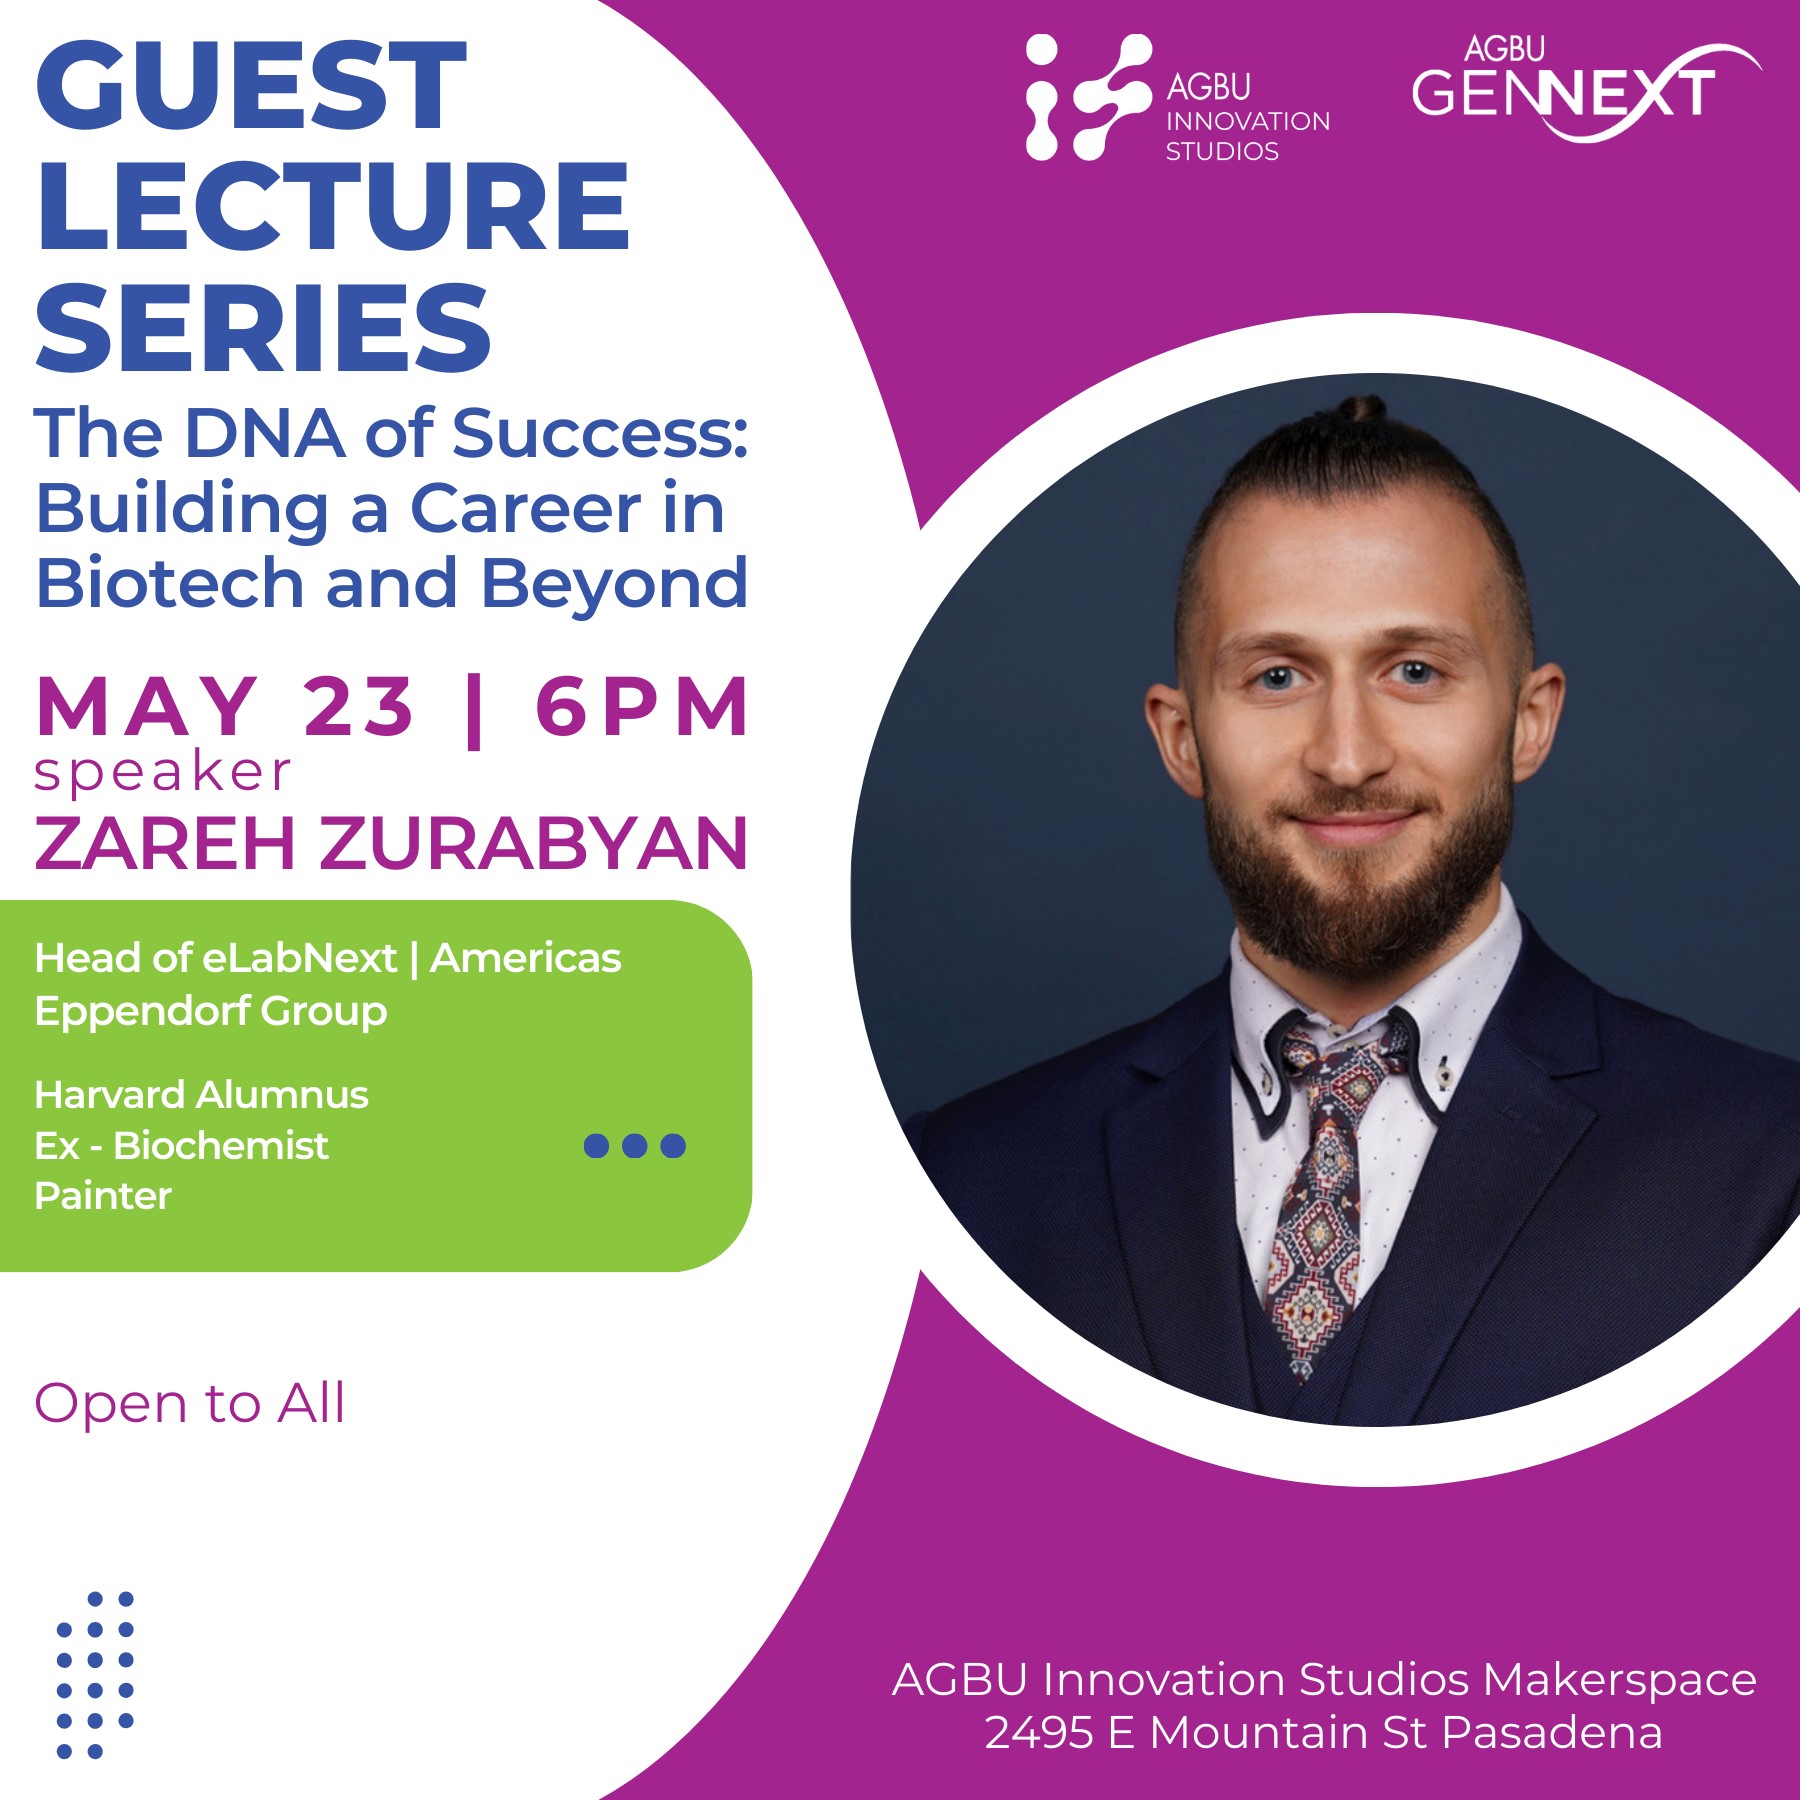 Guest Lecture Series with Zareh Zurabyan – The DNA of Success: Building a Career in Biotech and Beyond